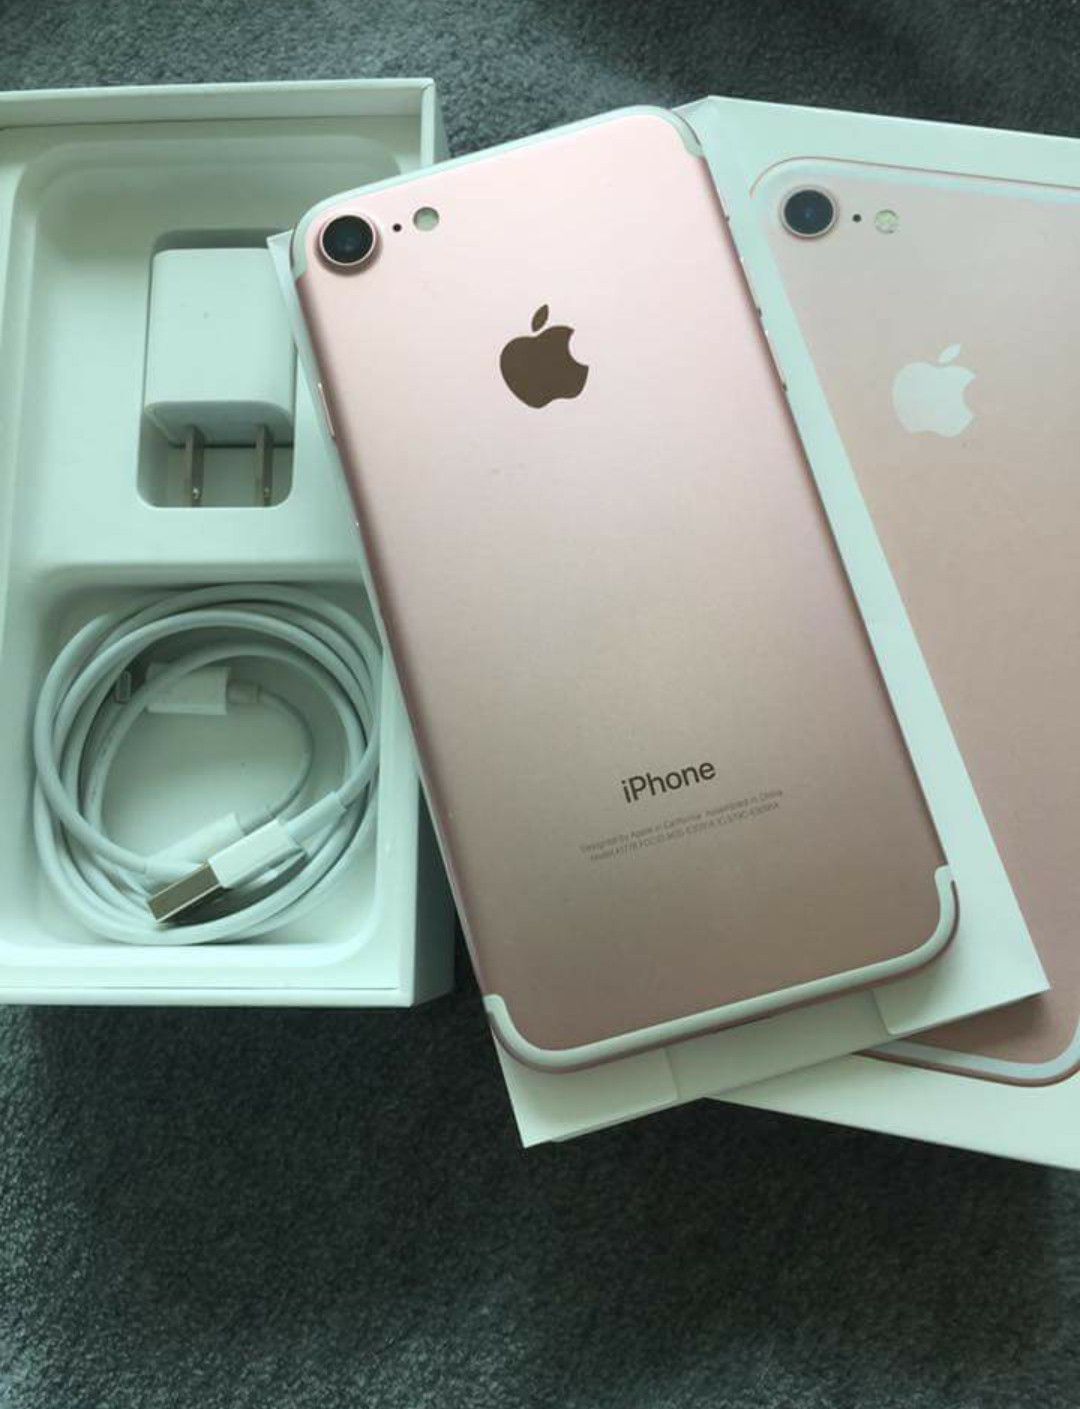 iPhone 7 32GB. Factory Unlocked and Usable with Any Company Carrier SIM Any Country